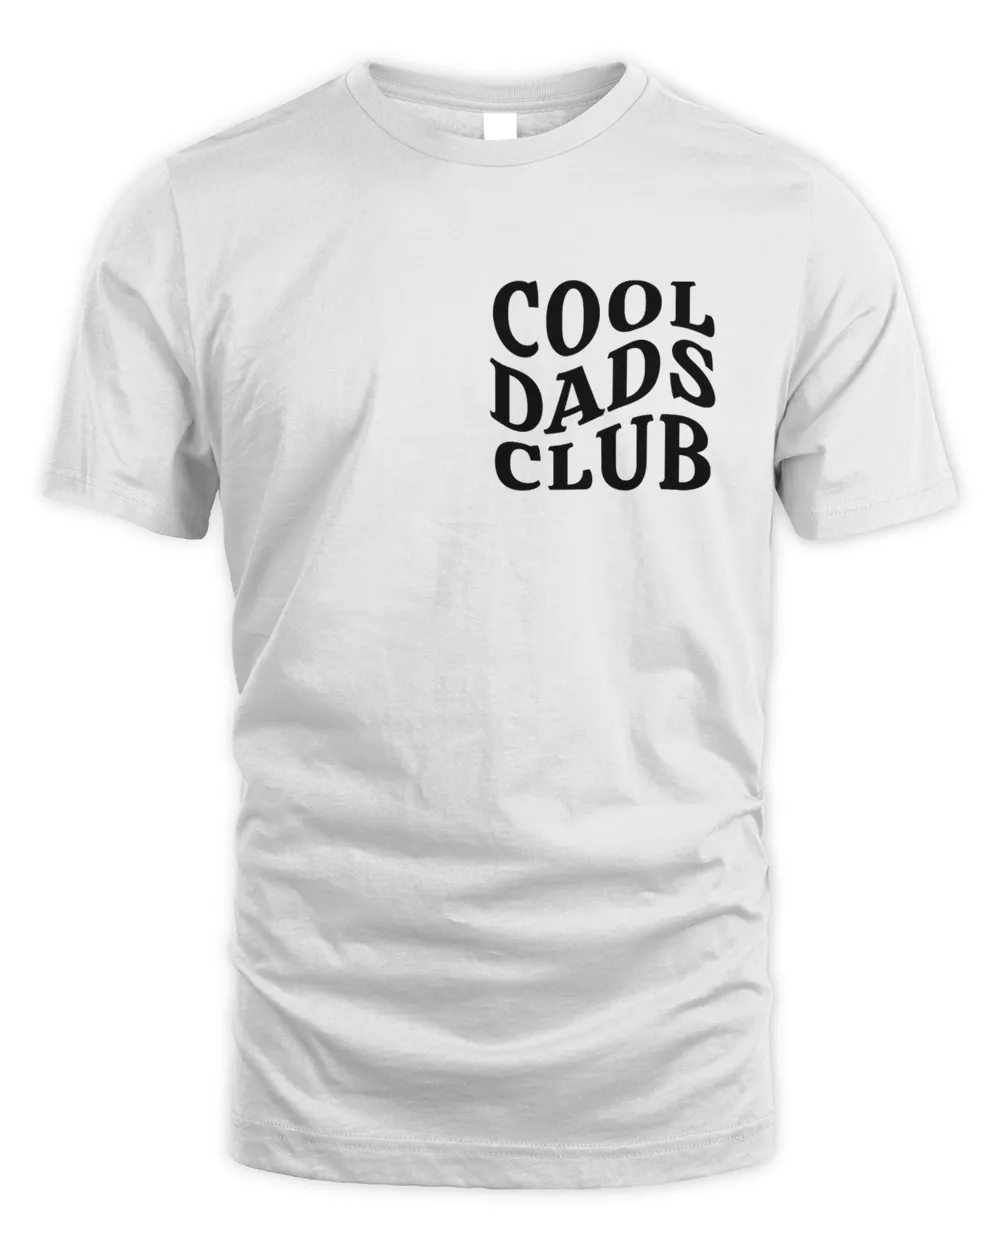 Cool Dads Club Shirt, Funny Husband Shirt, Gift for Him, Father's Day Gift, Daddy Shirt, Dad to be, Cool Dad